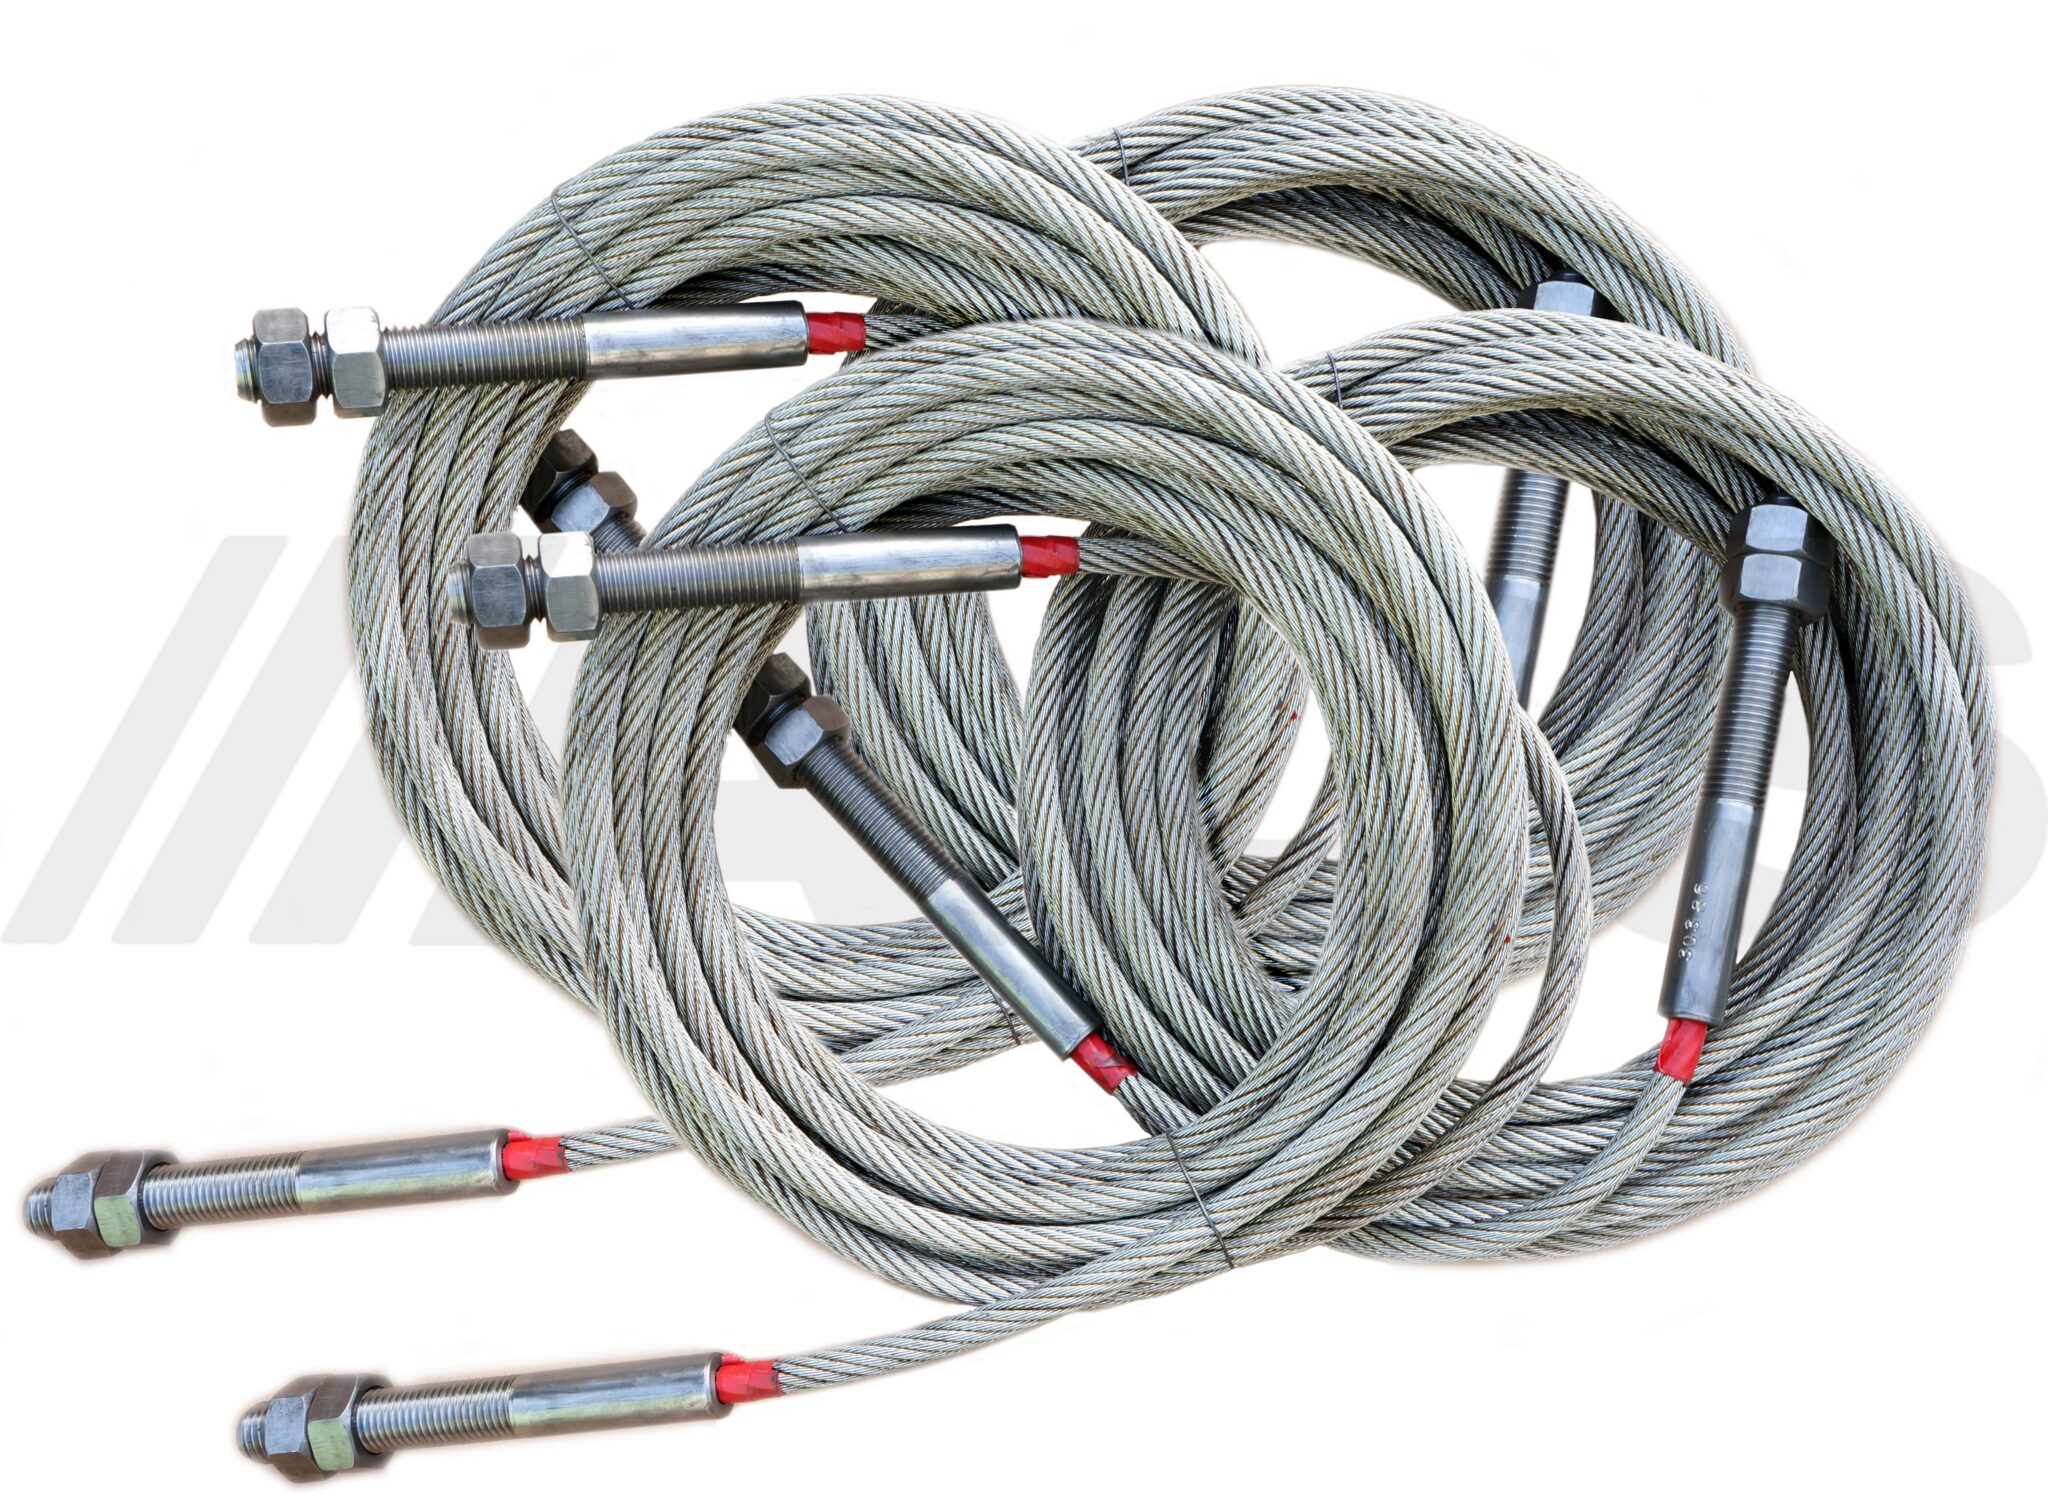 Full set of cables suitable for OMA 528 vehicle lift, ramp, hoist